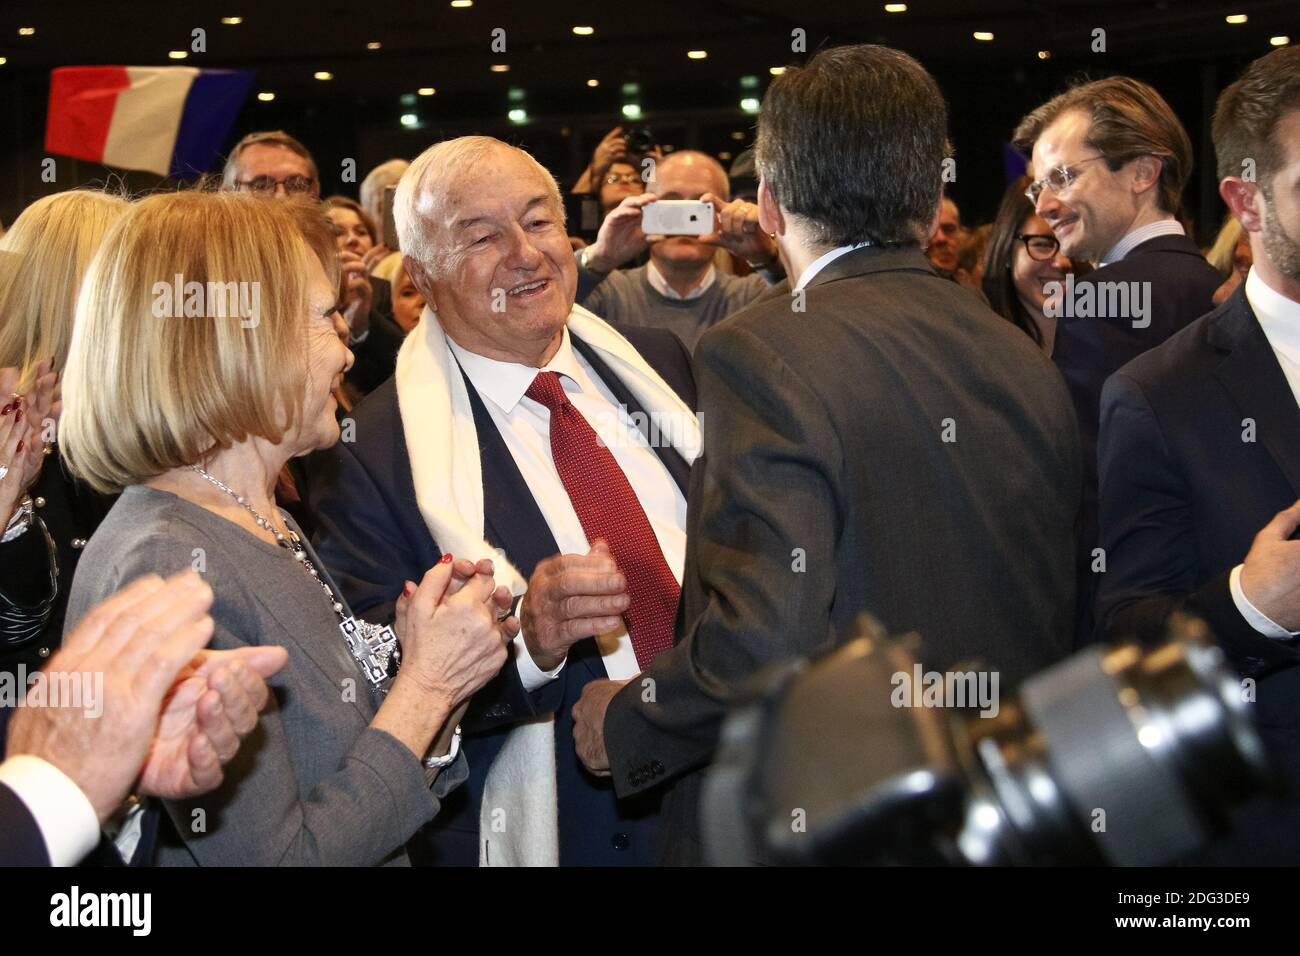 Bernard Brochand present for Candidate of the right in the 2017 presidential elections Francois Fillon holds a public meeting at Palais des Congres Nice Acropolis in Nice, southern France on January 11, 2017. Photo by Philippe FARJON/ABACAPRESS.COM Stock Photo